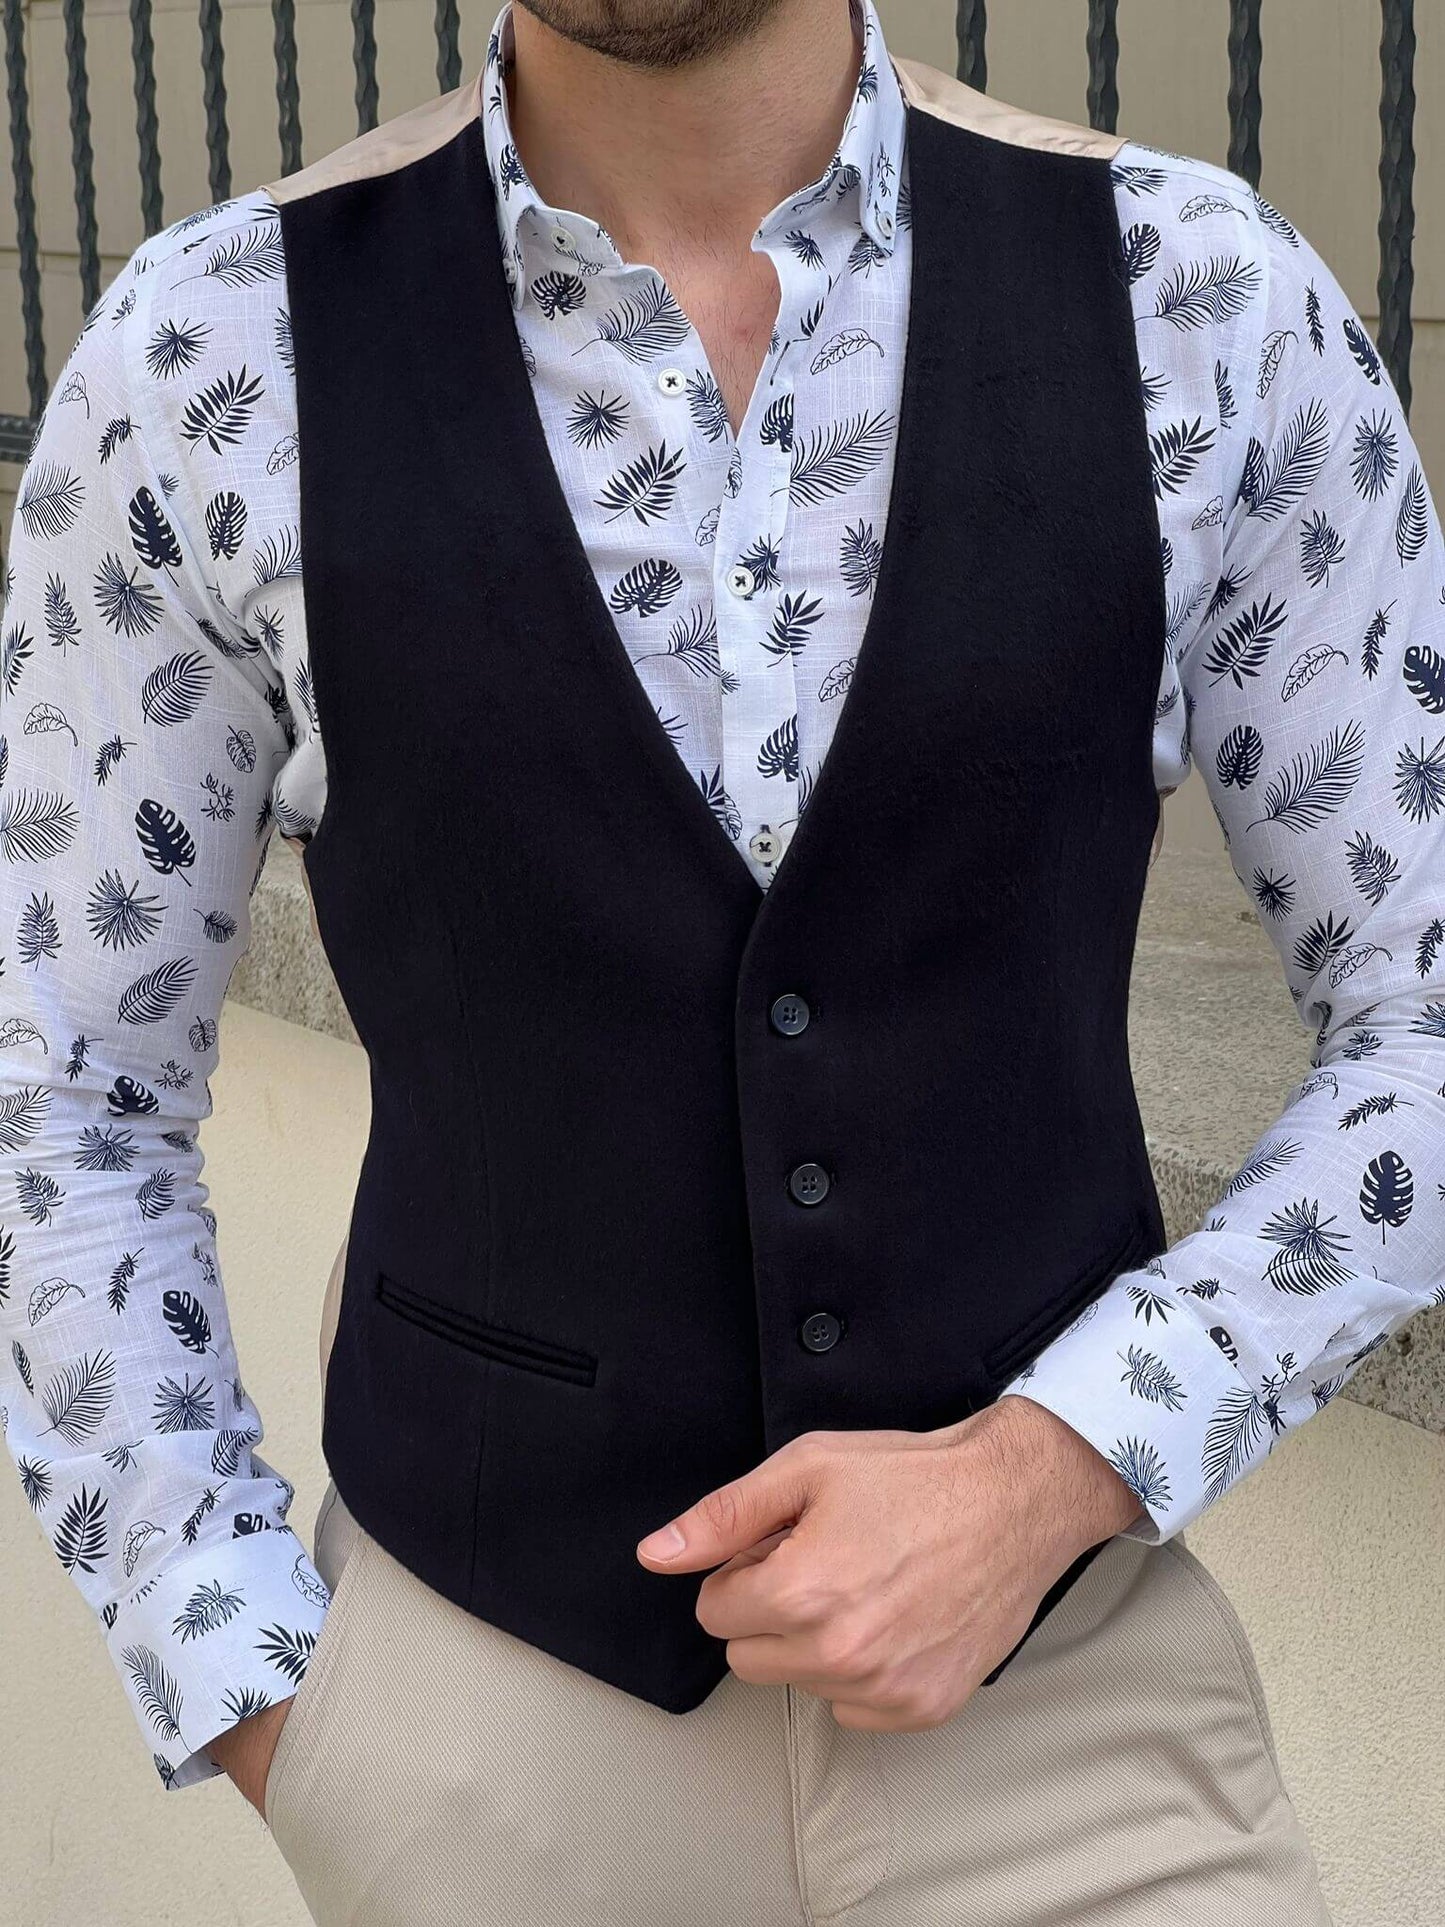 Navy blue vest featuring a slim fit for a polished look